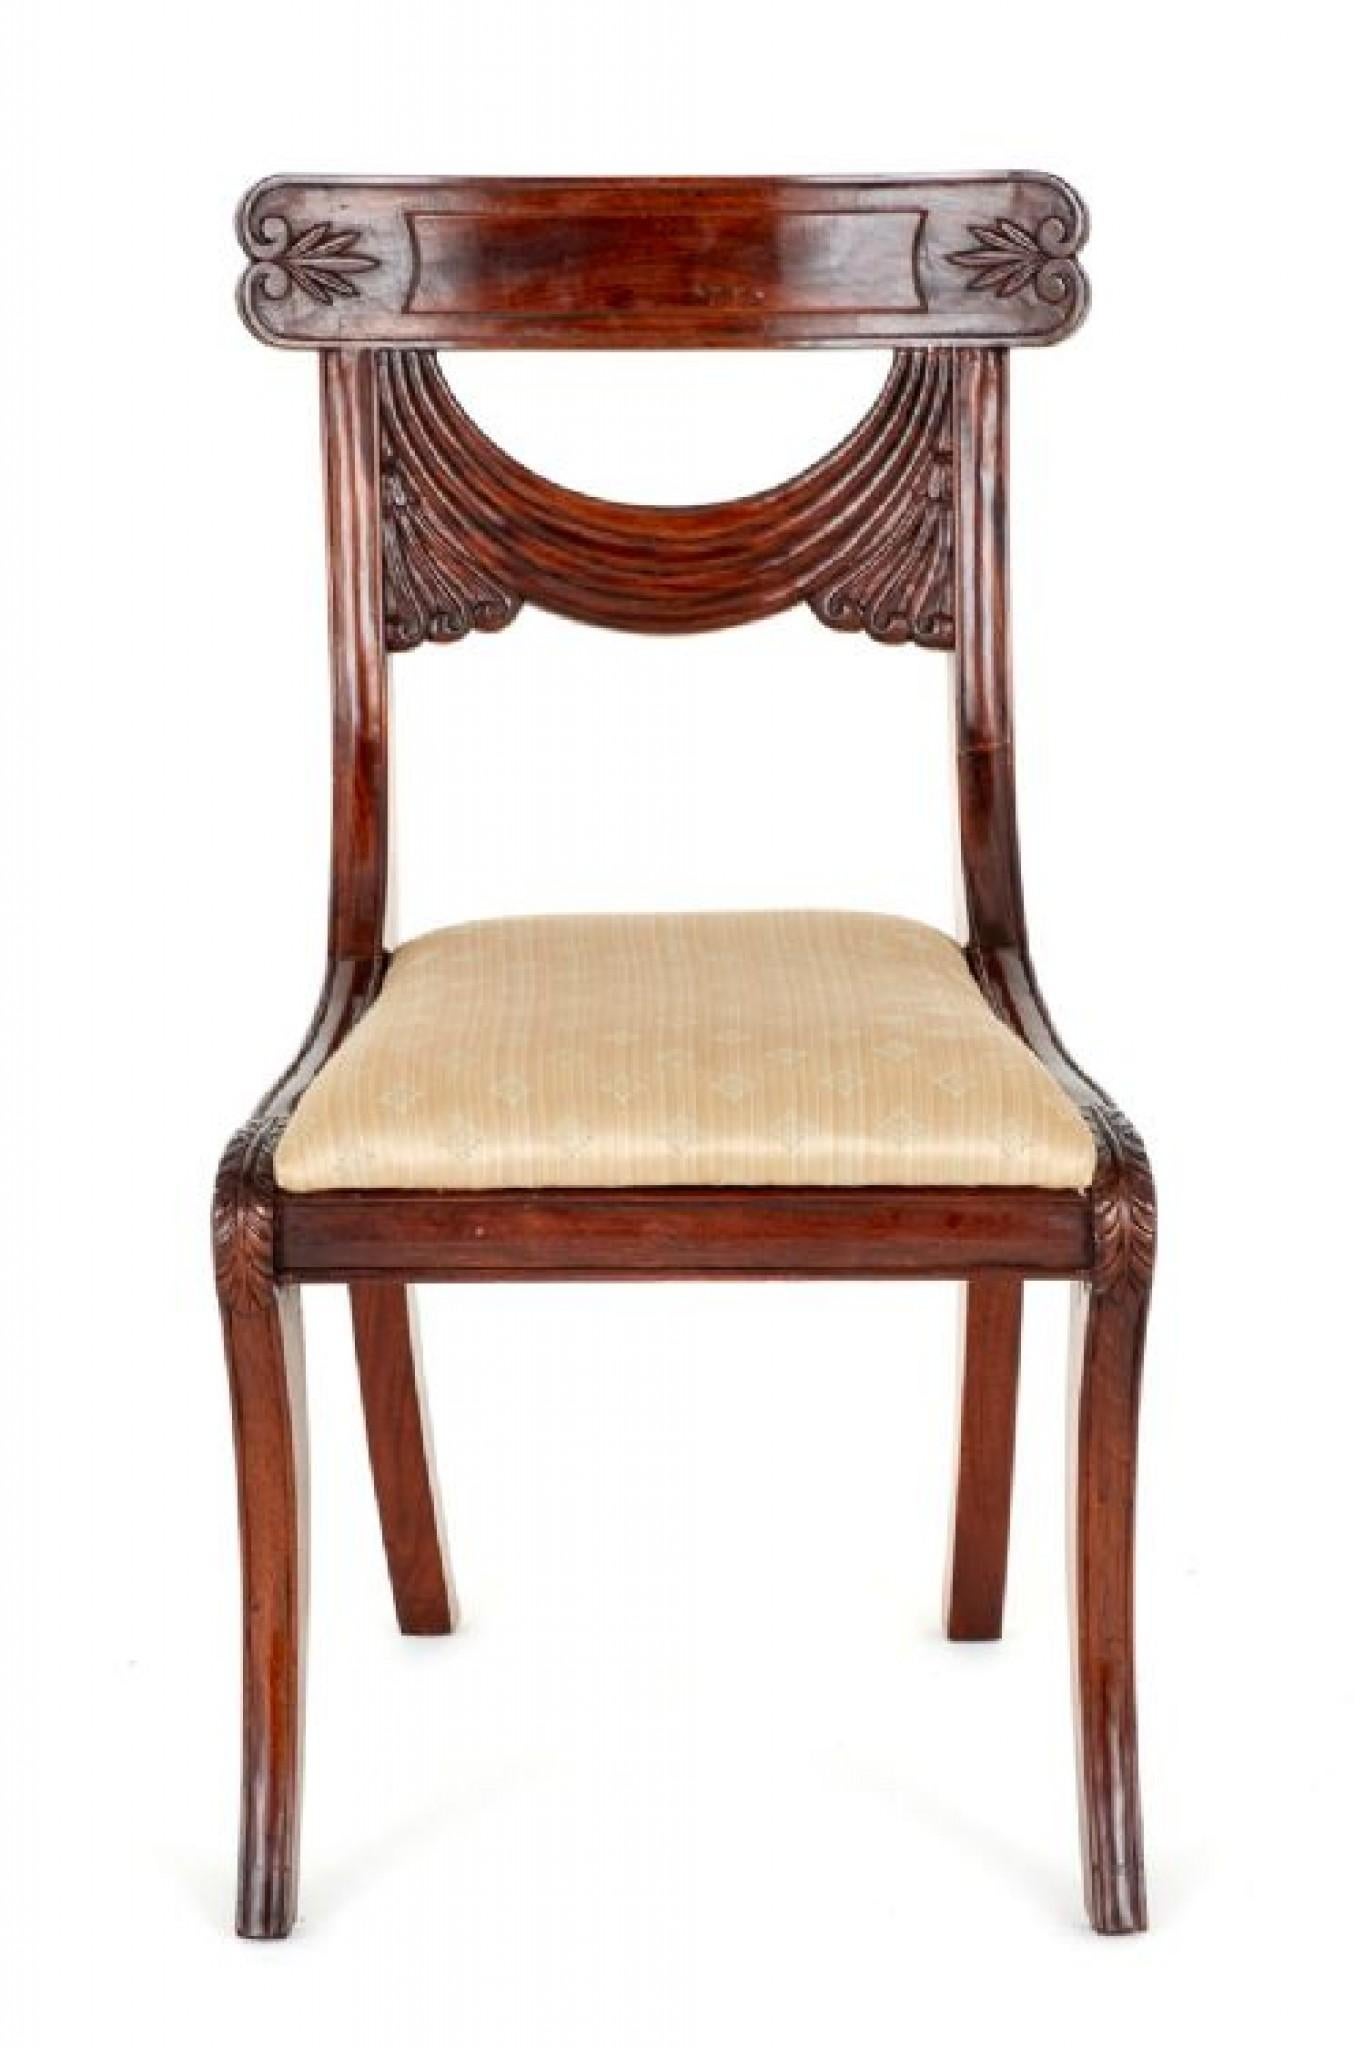 Set of 10 (8 + 2) mahogany regency style dining chairs.
These elegant dining chairs stand upon sabre front legs with swept back legs.
circa 1930
The seats being of a lift out form.
The backs of the chairs featuring a carved swag and drape.
The